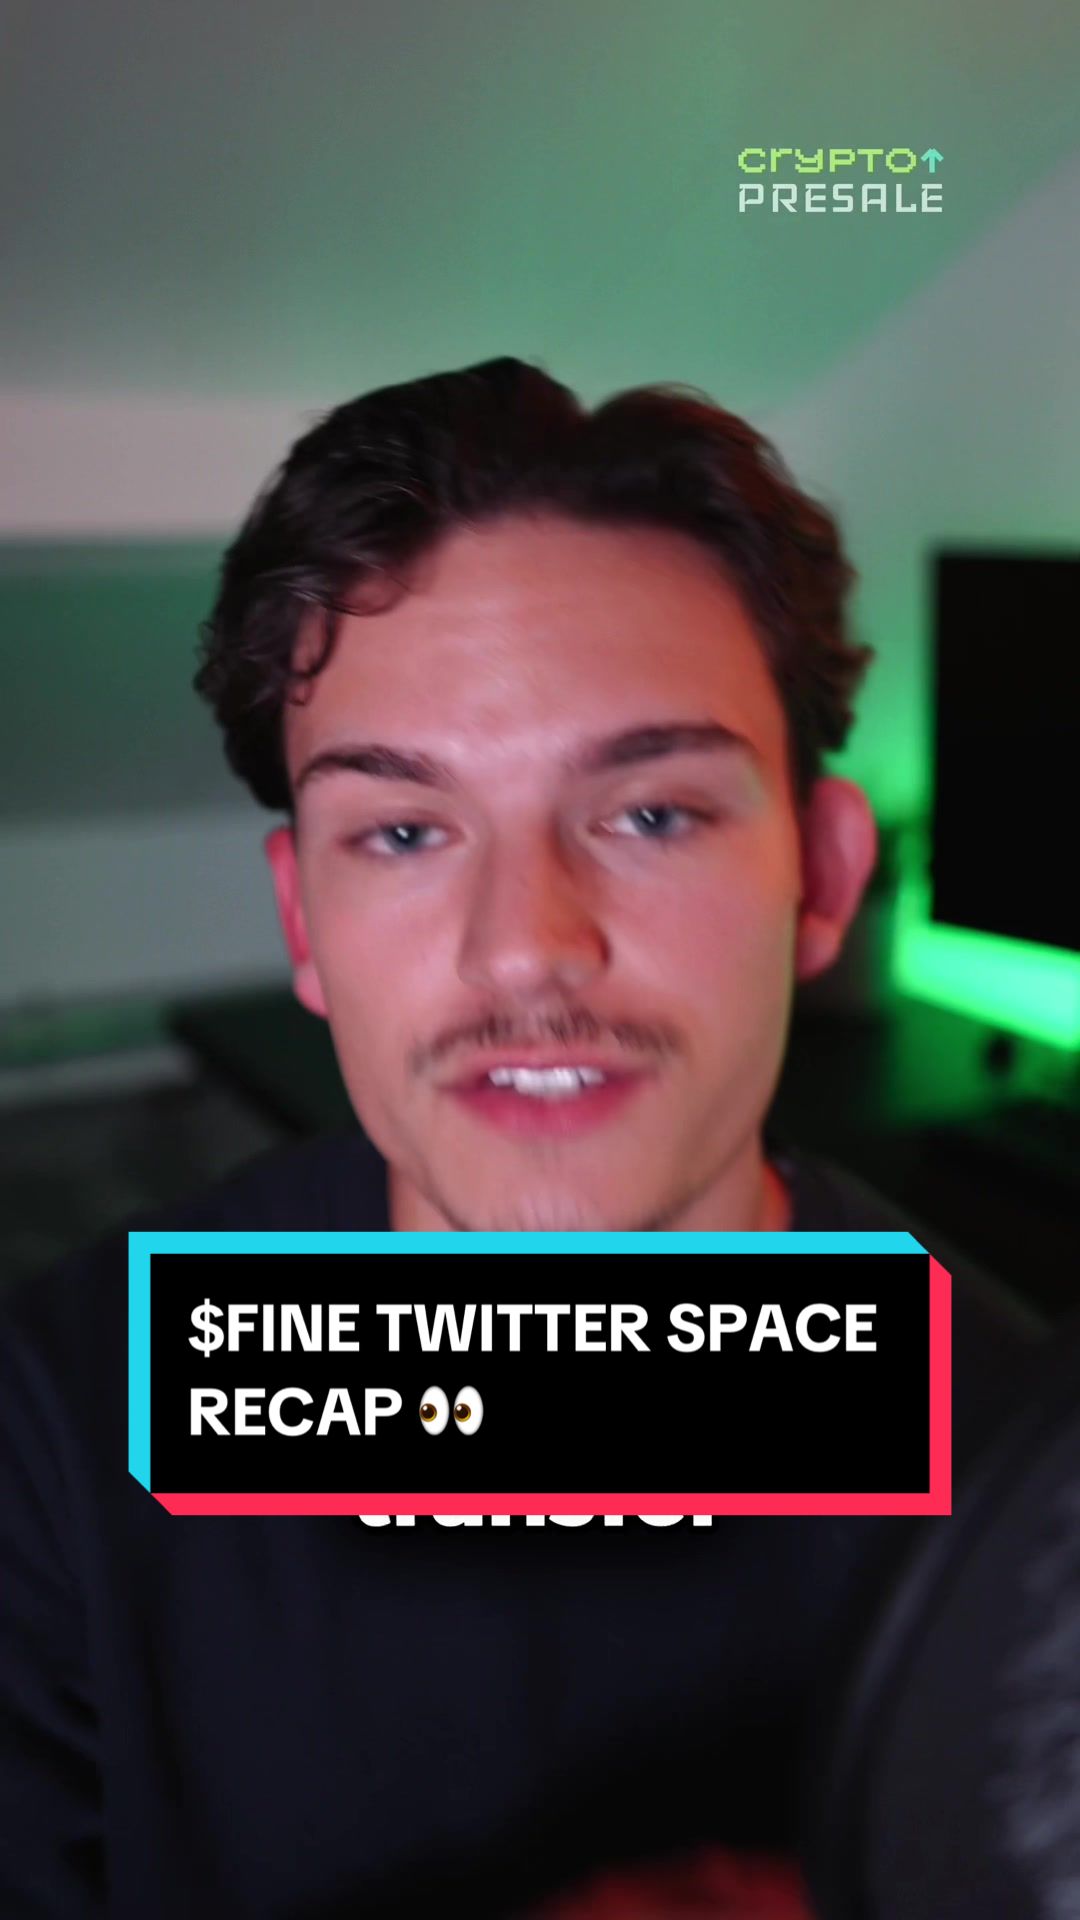 NEW: The recap of last nights Twitter Space with @tehlordkek from @thisisfinerc $FINE